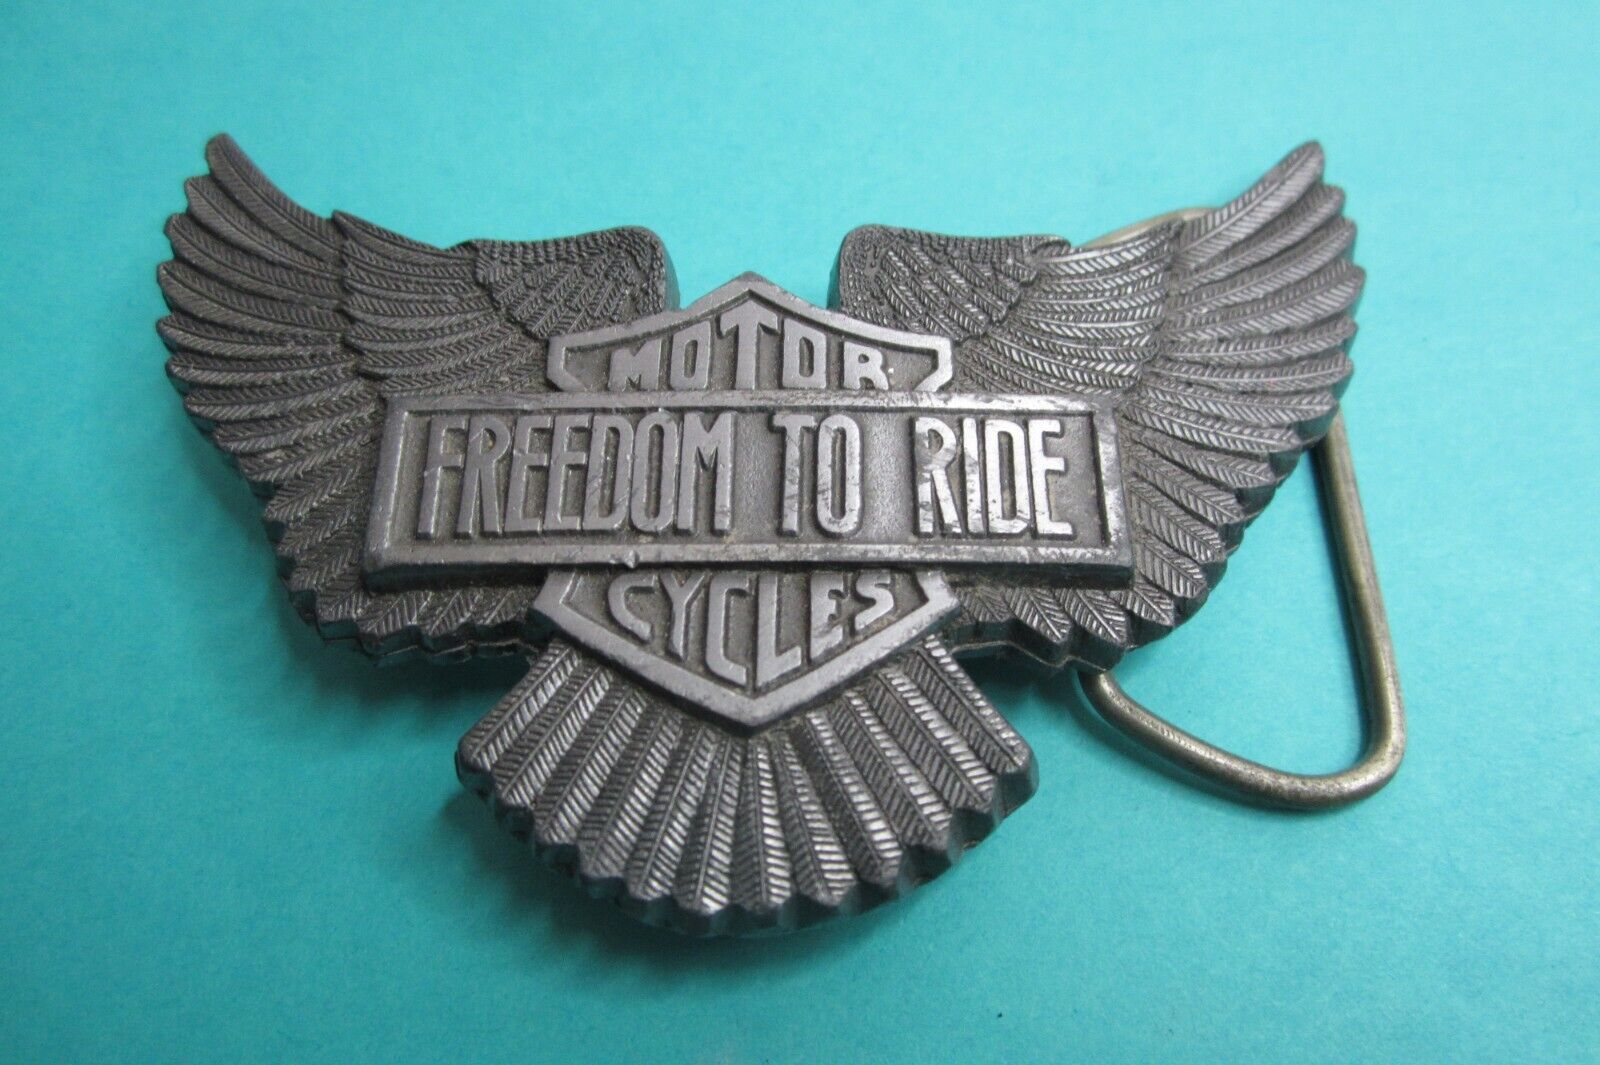 Harley Davidson Freedom to Ride Motorcycles Belt Buckle 1980s